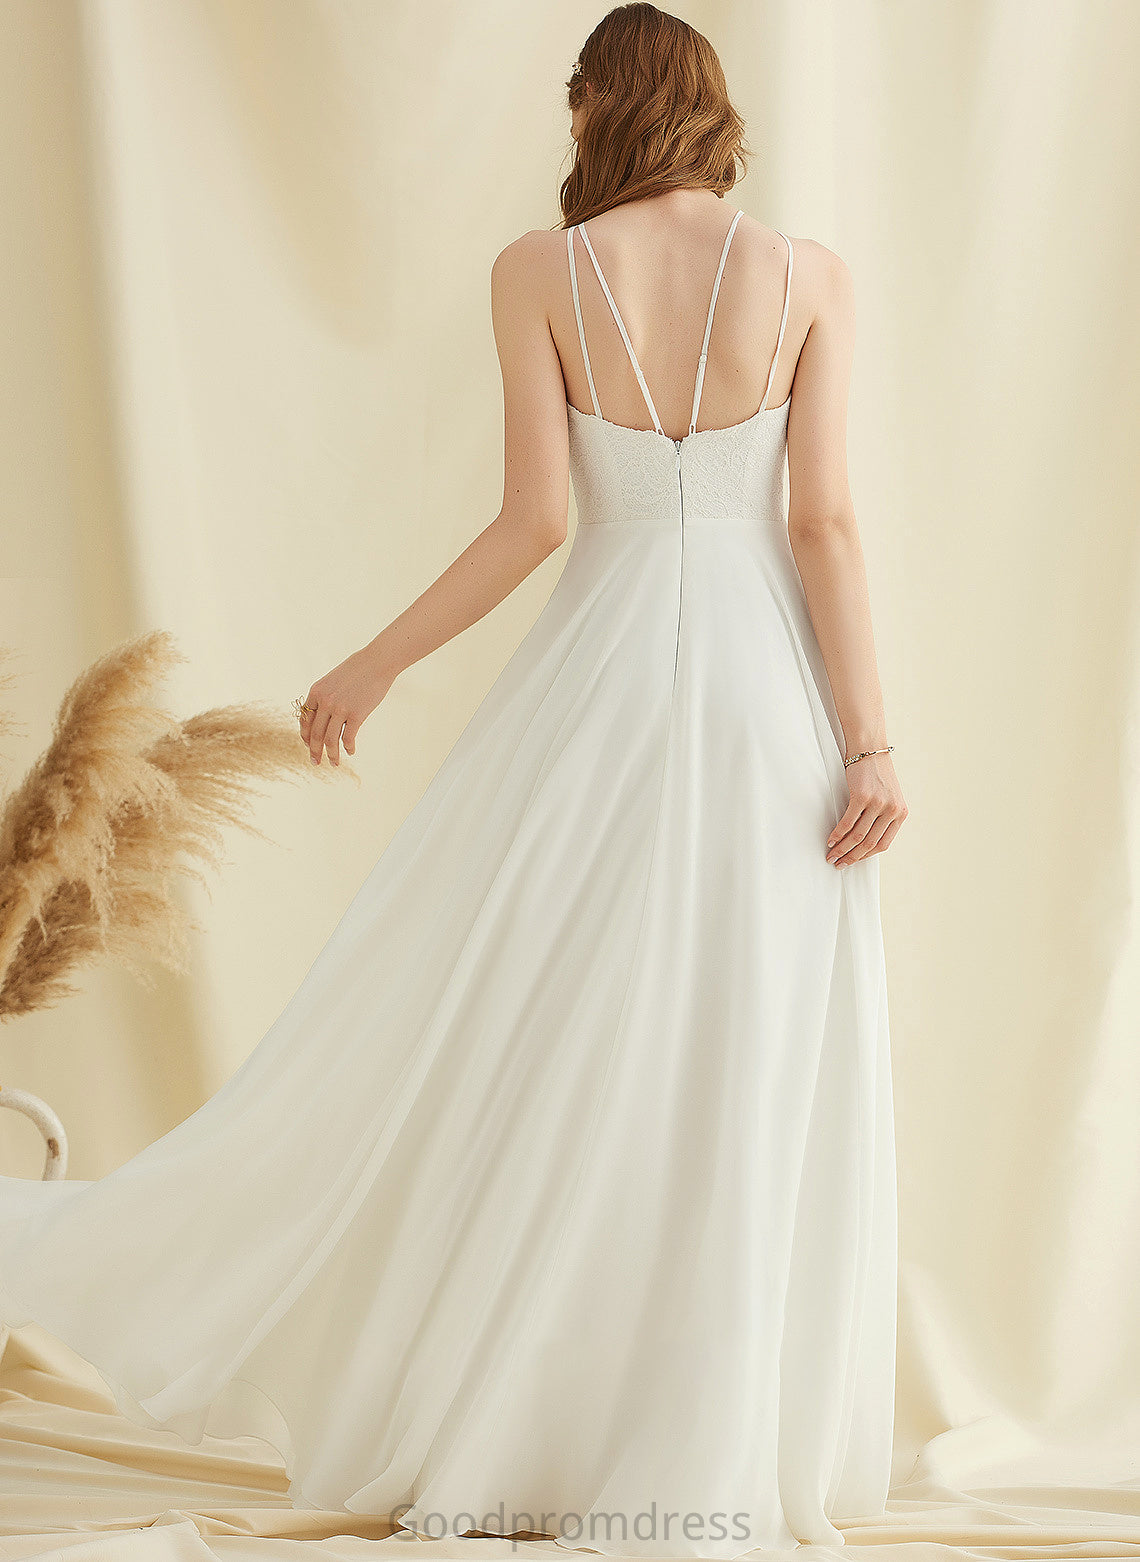 Lace Pockets Rylie Scoop Wedding A-Line Wedding Dresses Neck Dress Chiffon With Floor-Length